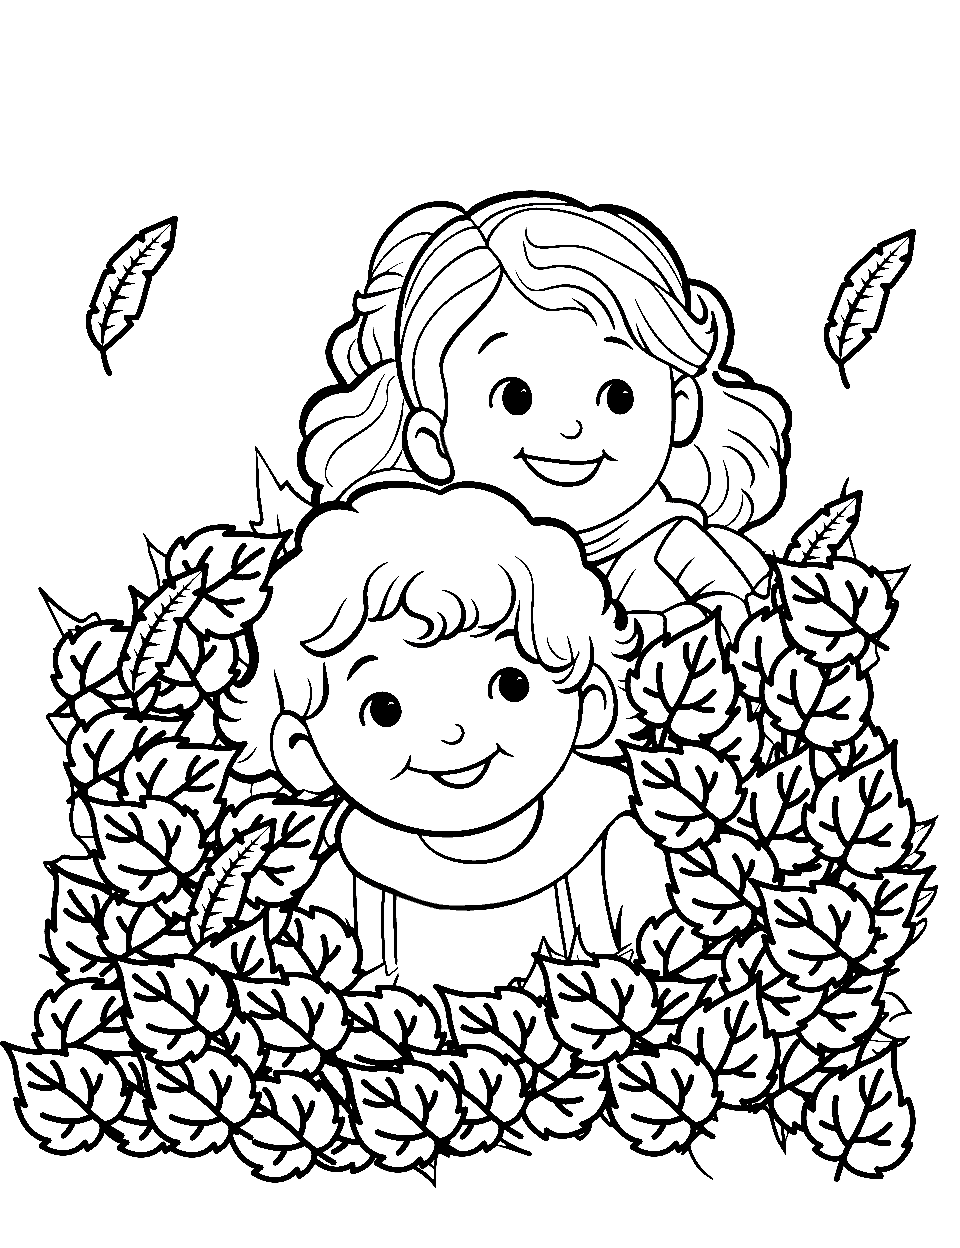 Autumn Antics Coloring Page - Kids playing in a pile of leaves during fall.